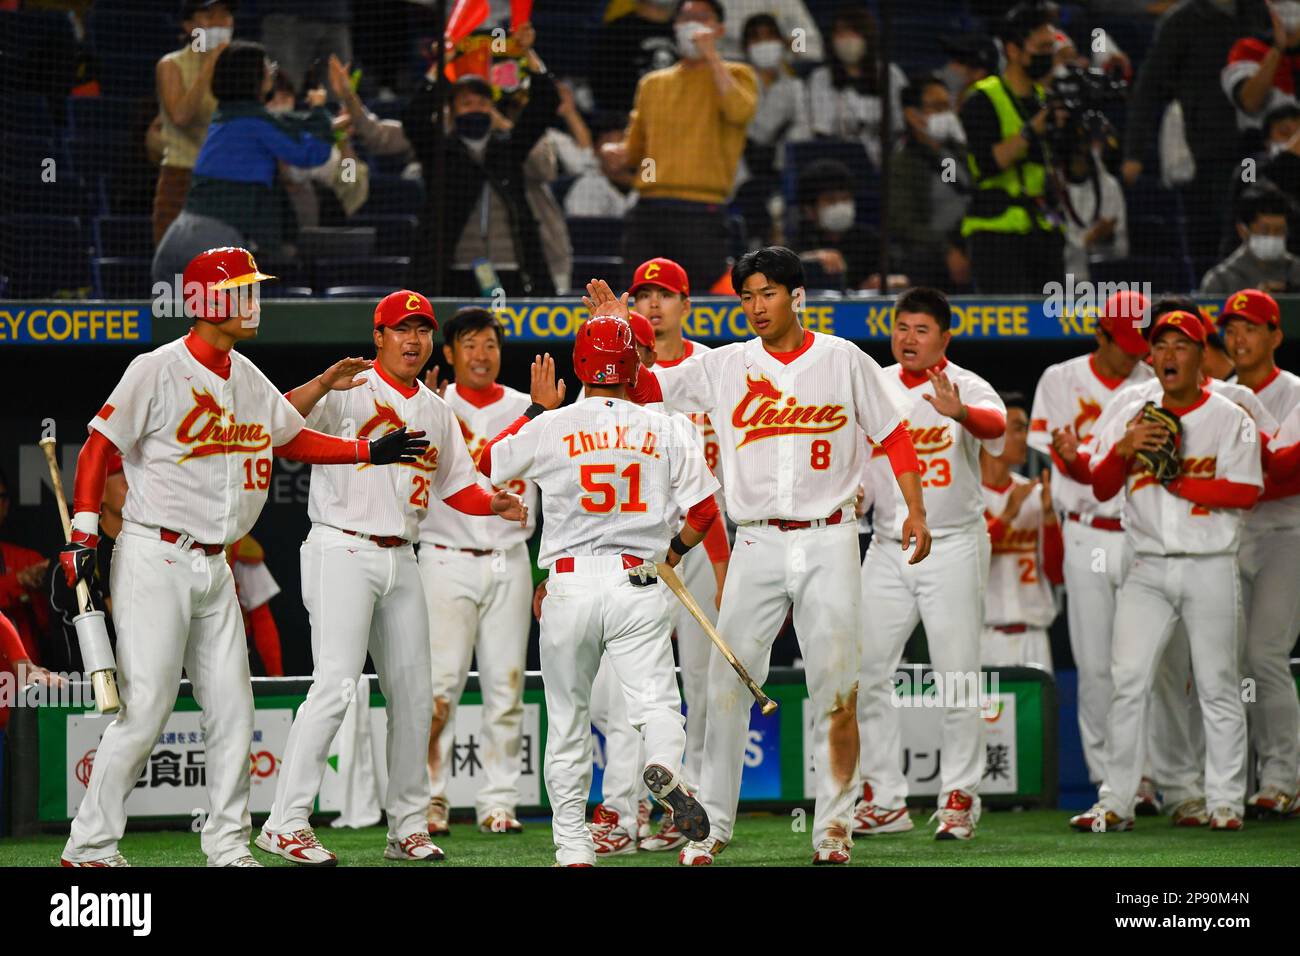 Japan's Lars Nootbaar celebrates after winning the World Baseball Classic  game against South Korea at Tokyo Dome in Bunkyo Ward, Tokyo on March 10,  2023. Japan beat South Korea 13-4. ( The